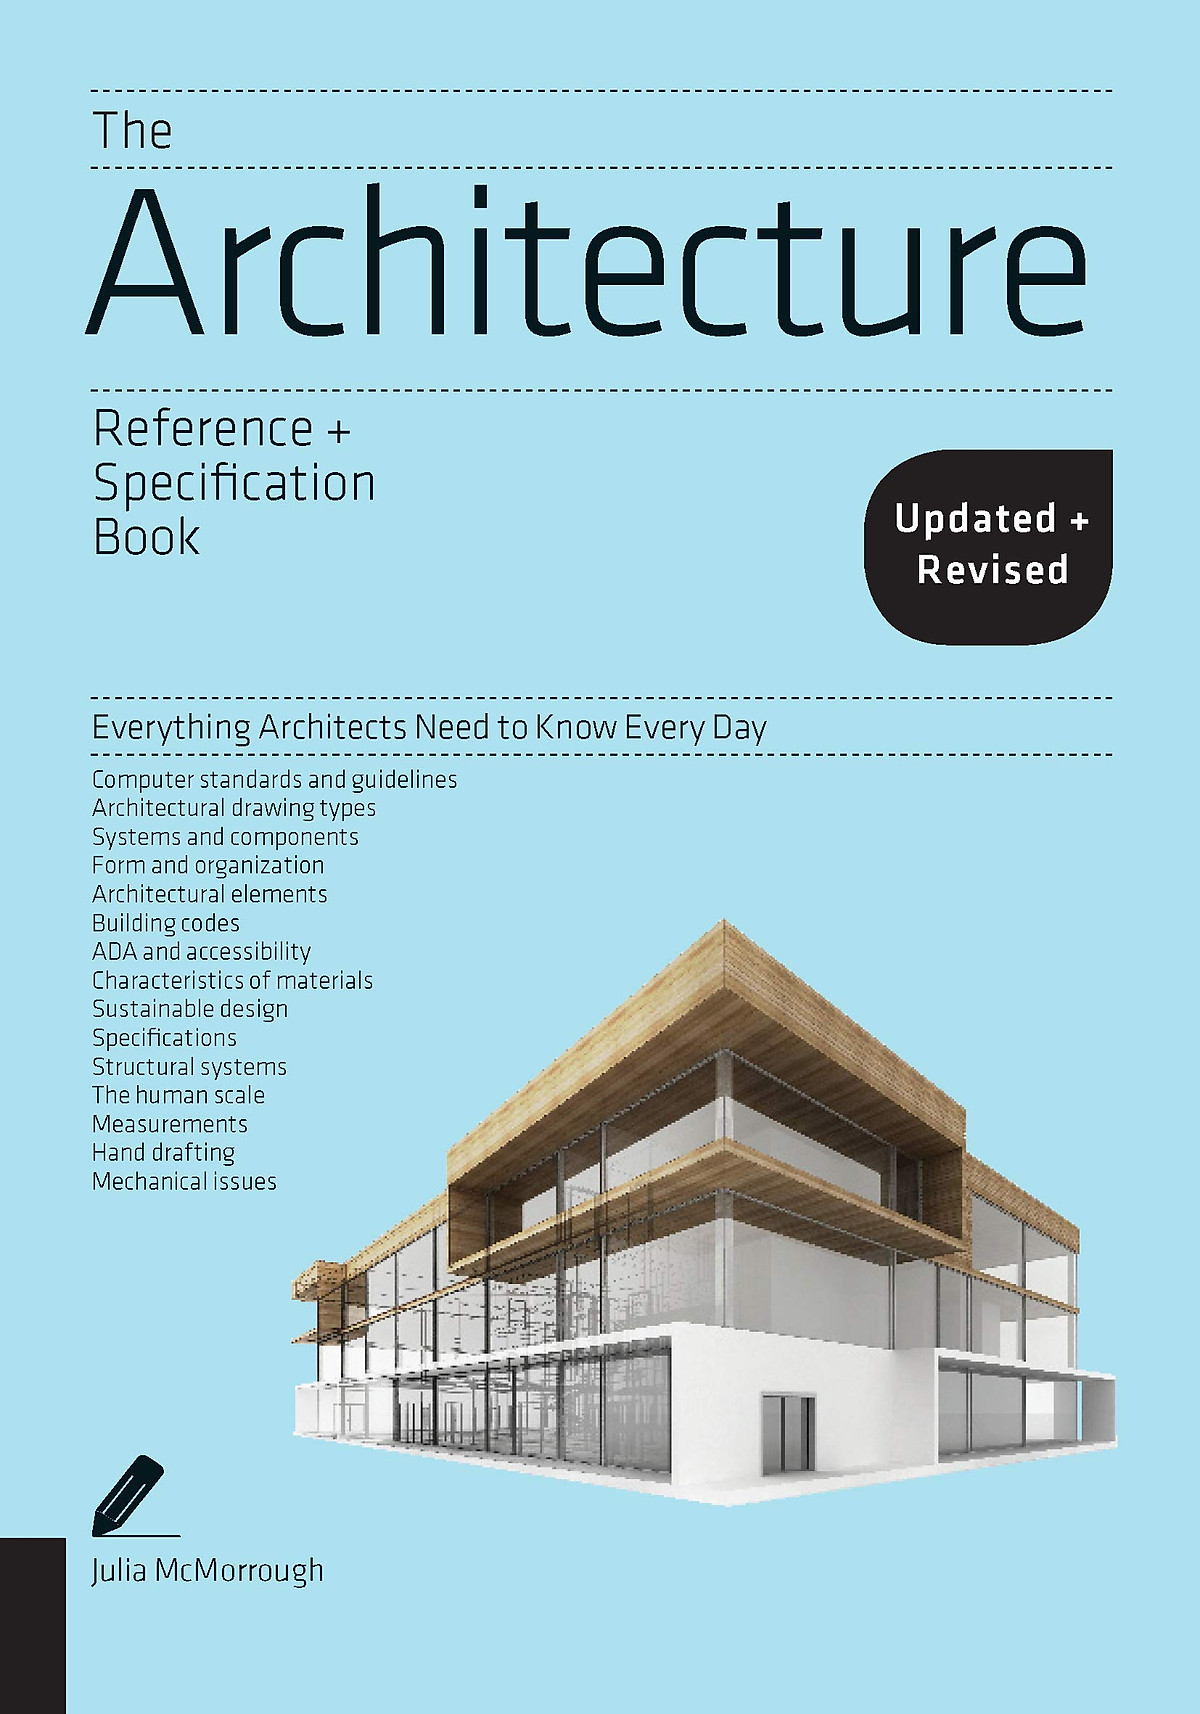 The Architecture Reference & Specification Book